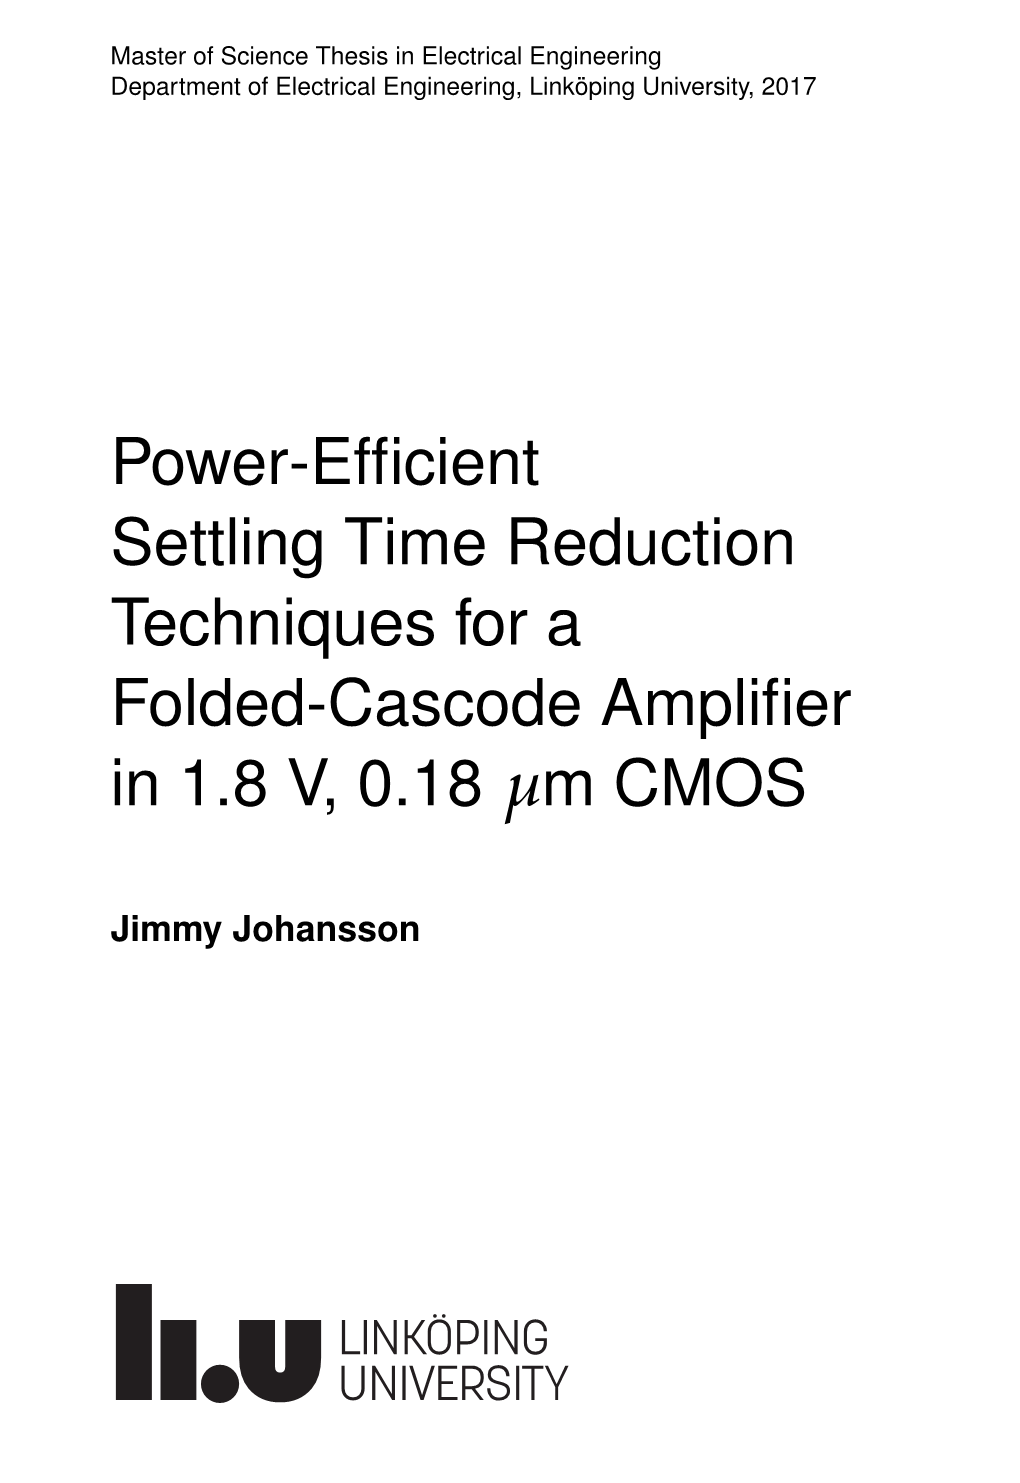 Power-Efficient Settling Time Reduction Techniques for a Folded